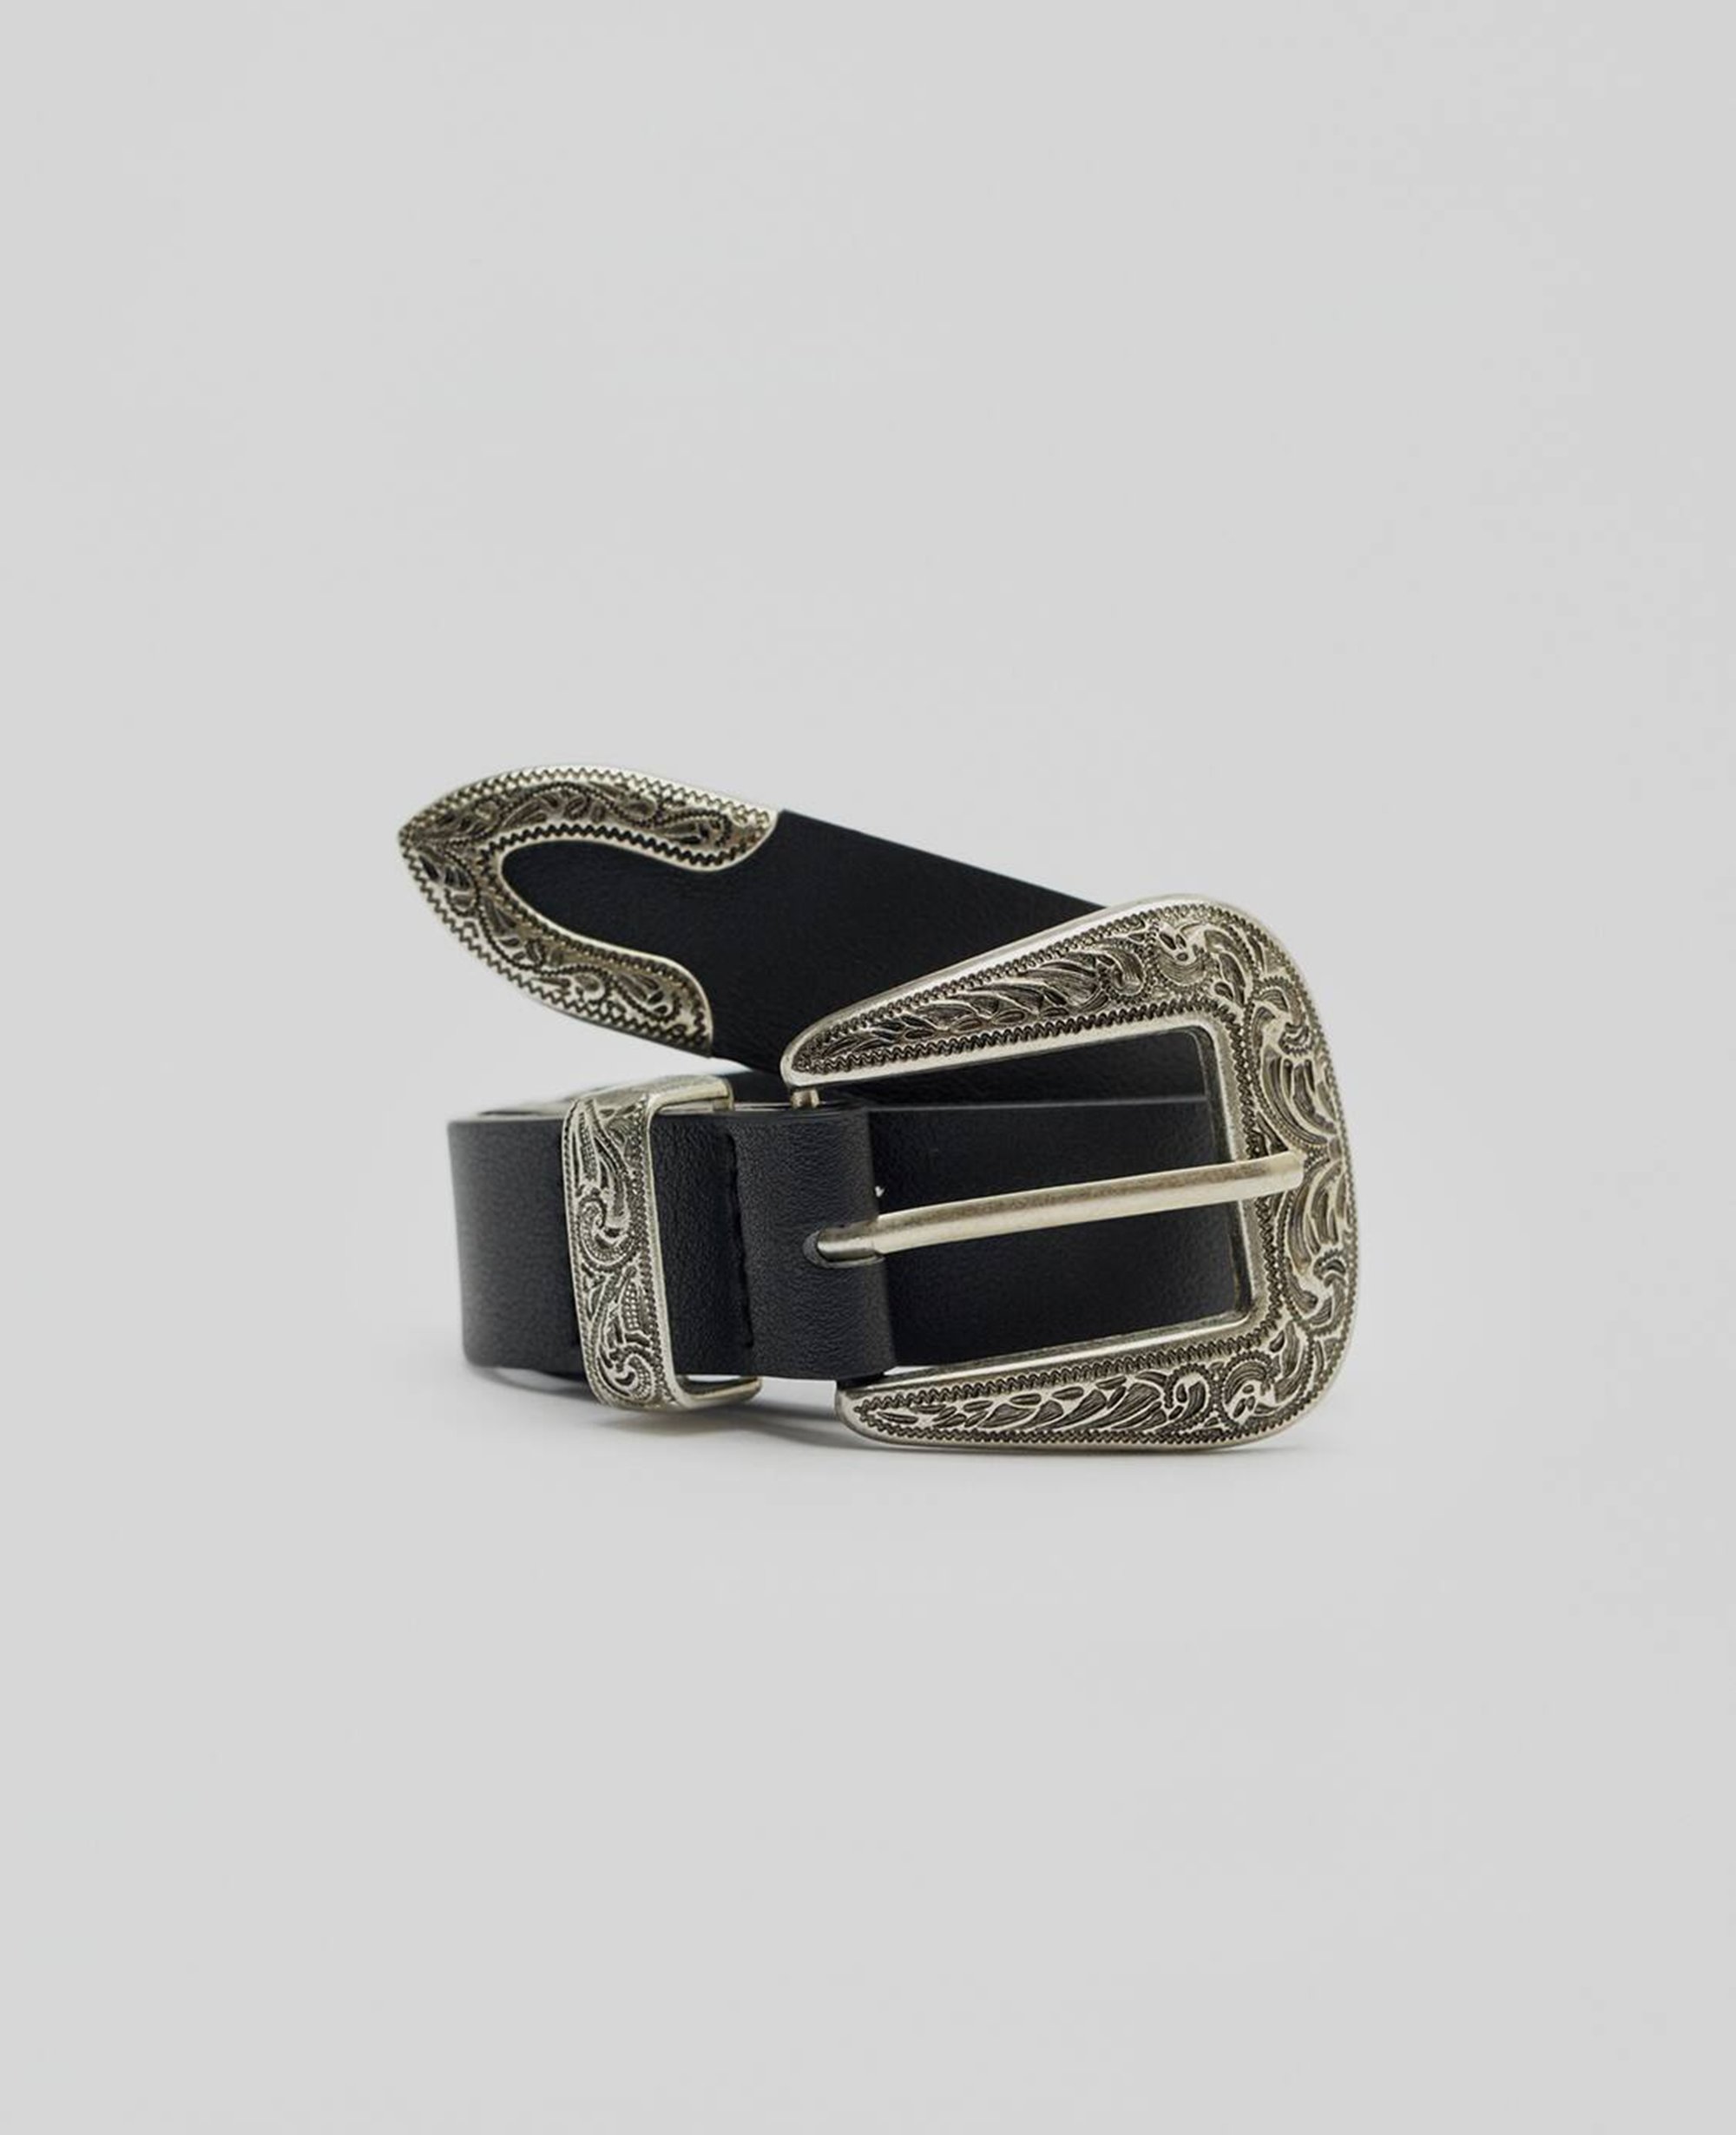 Pin by Aultry on #SAUCEGANG  Fashion belts, Luxury belts, Fashion  accessories